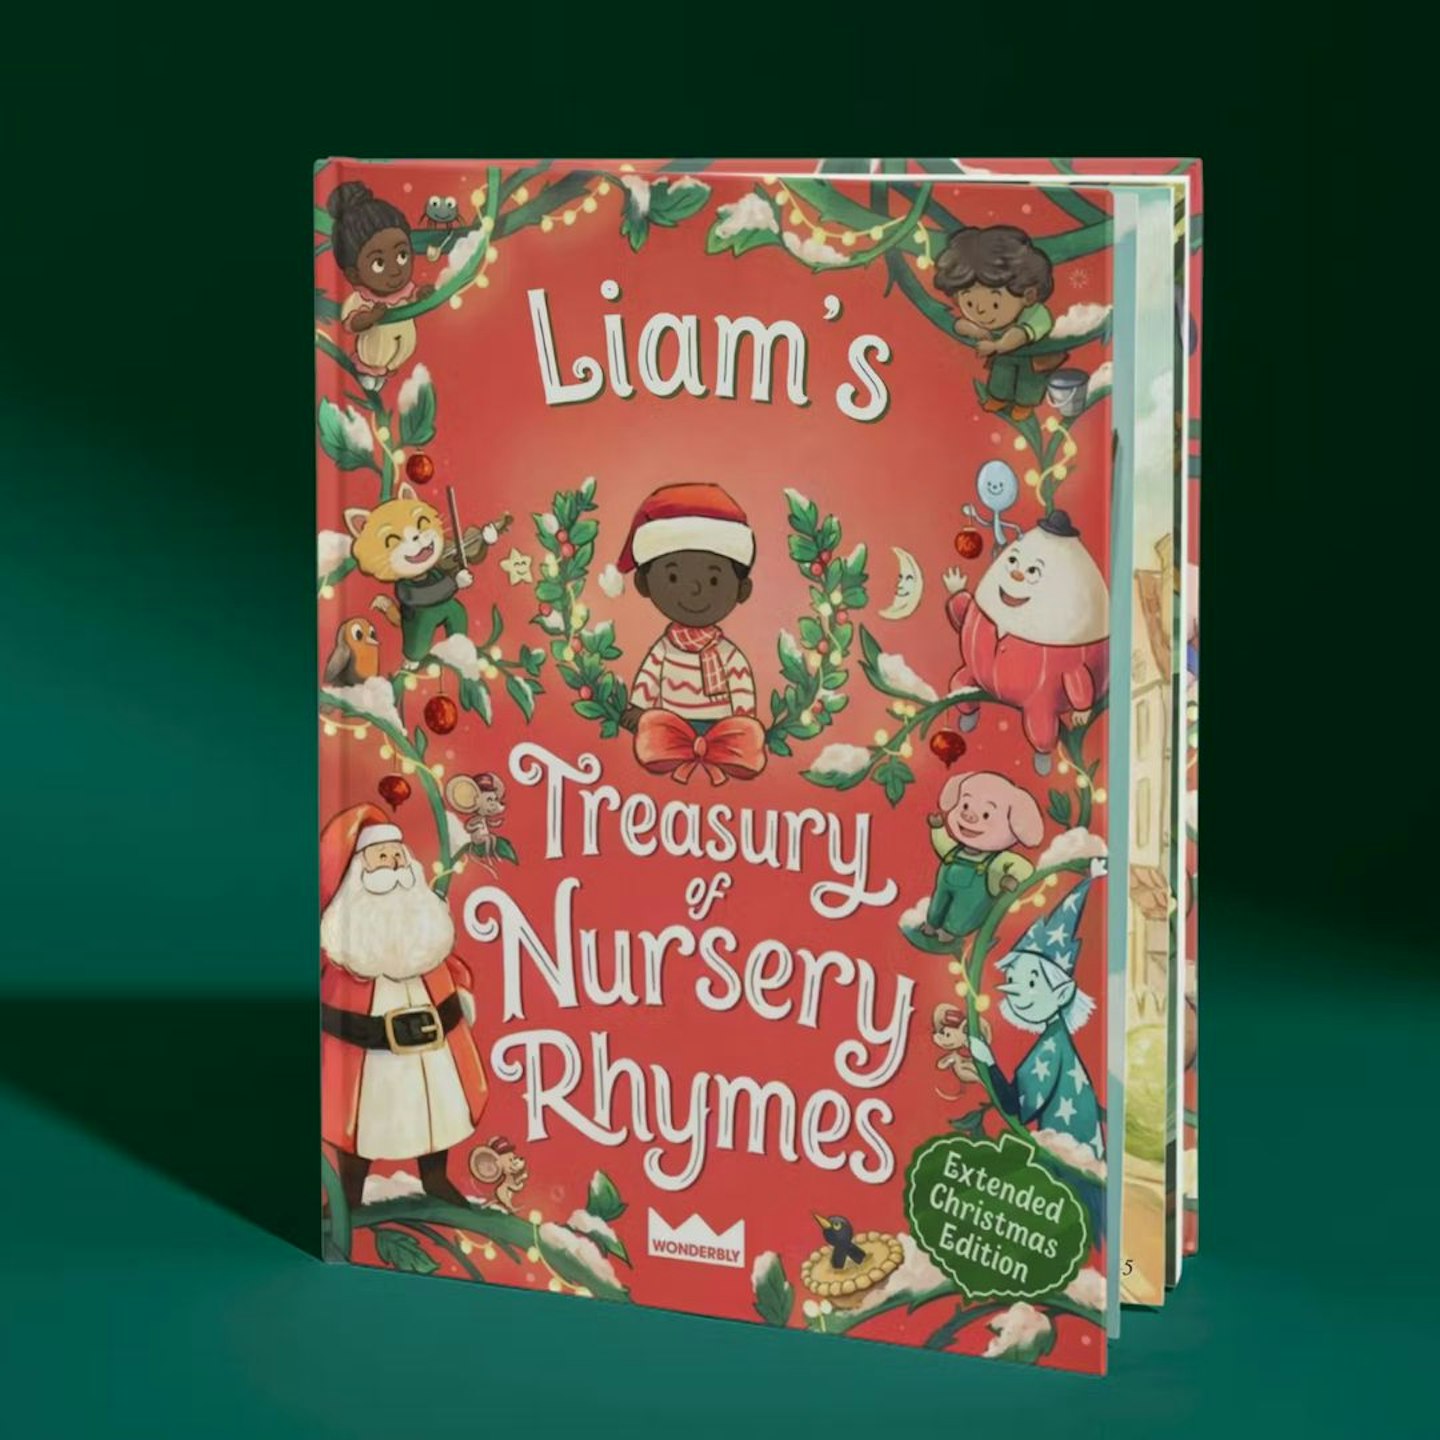  Best Christmas Gifts For Kids: Treasury of Nursery Rhymes: Extended Christmas Edition